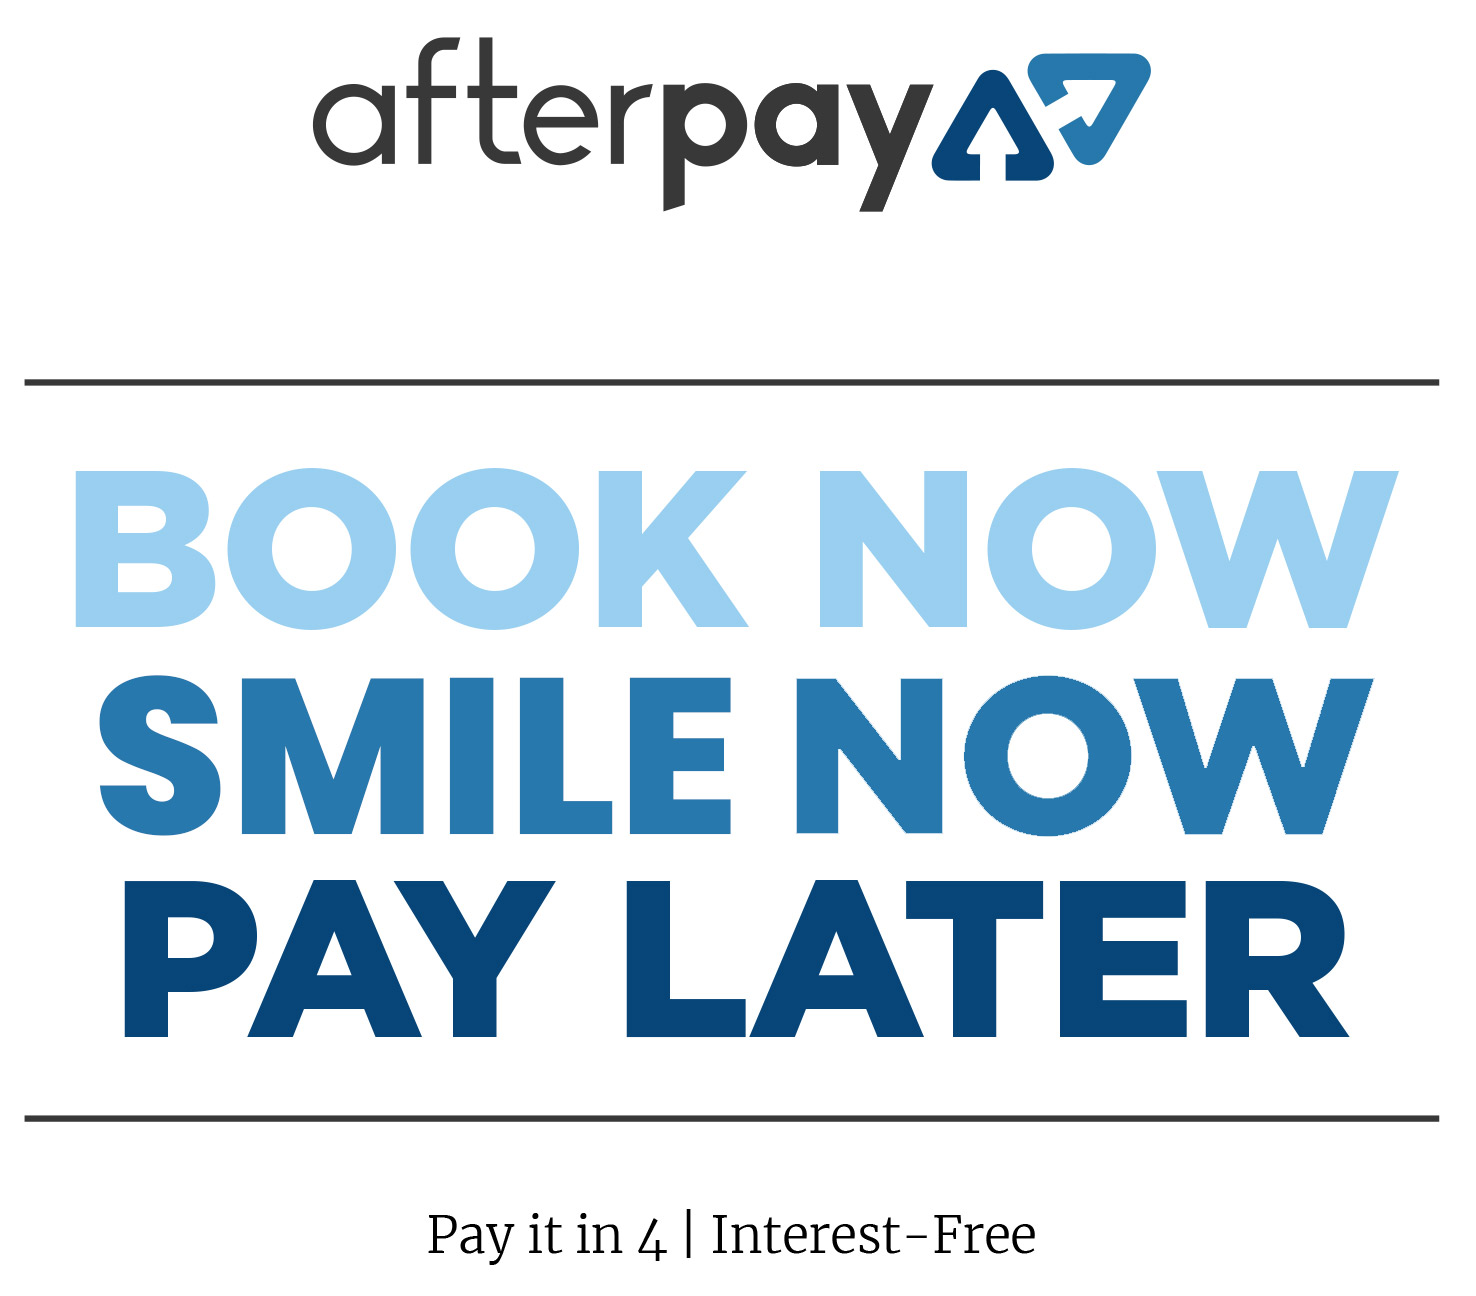 Afterpay interest free payment option